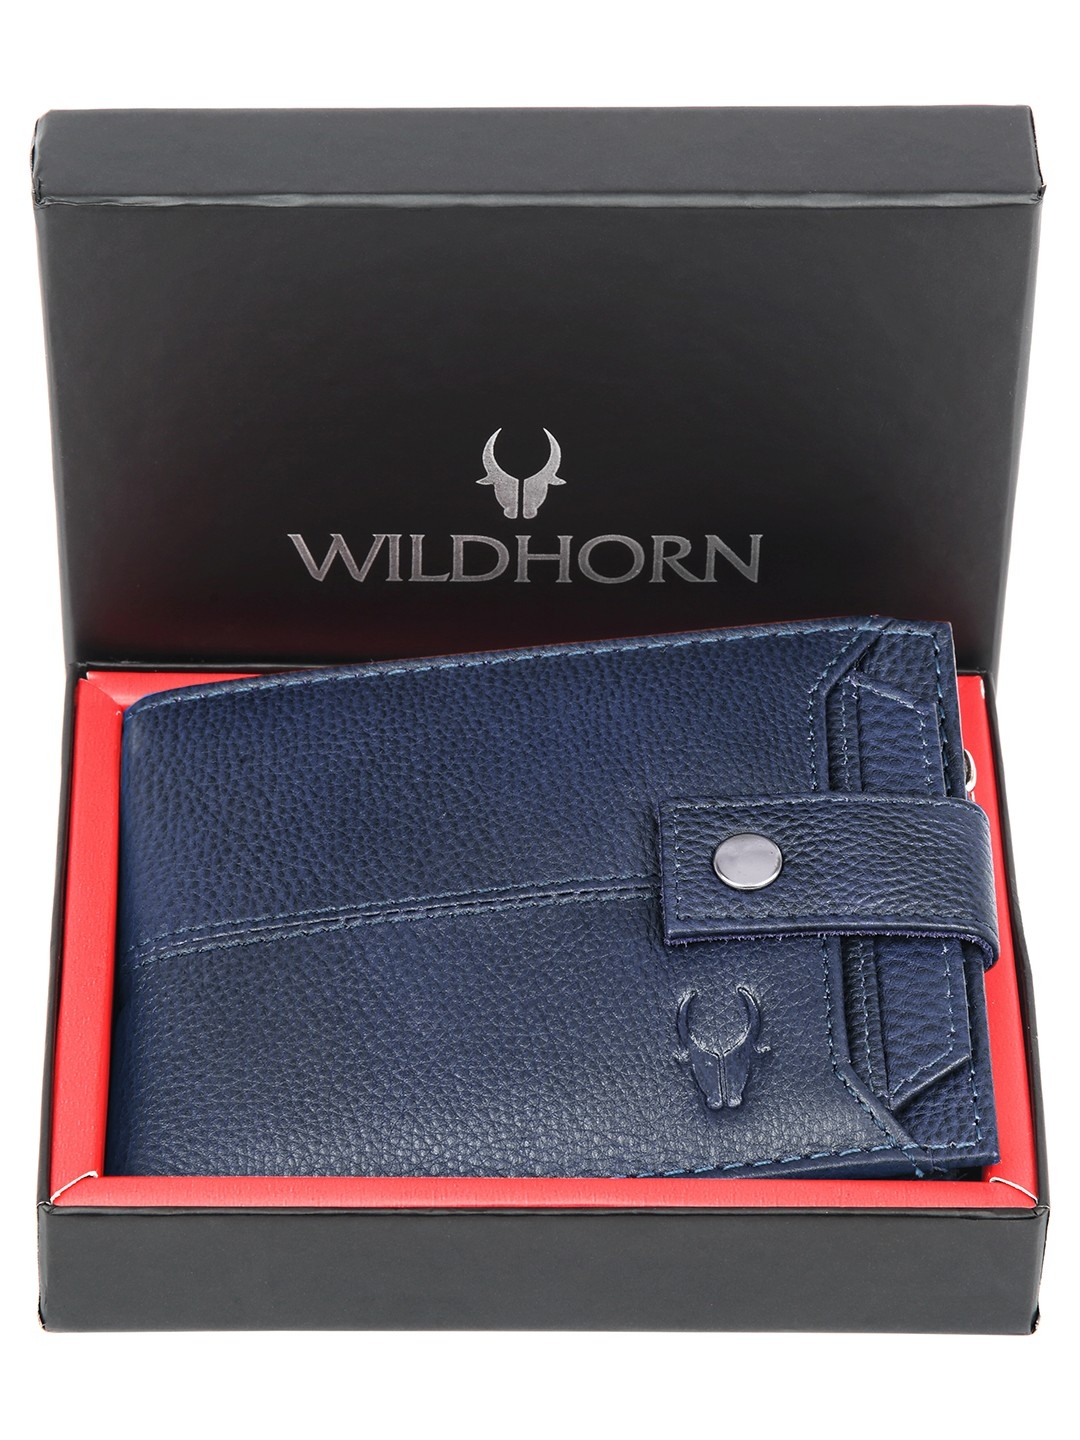 WildHorn | WildHorn Top Grain Leather Wallet for Men | Ultra Strong Stitching | Handcrafted | RFID Blocking | Zip Wallet with 9 Card Slots | 2 ID Slots